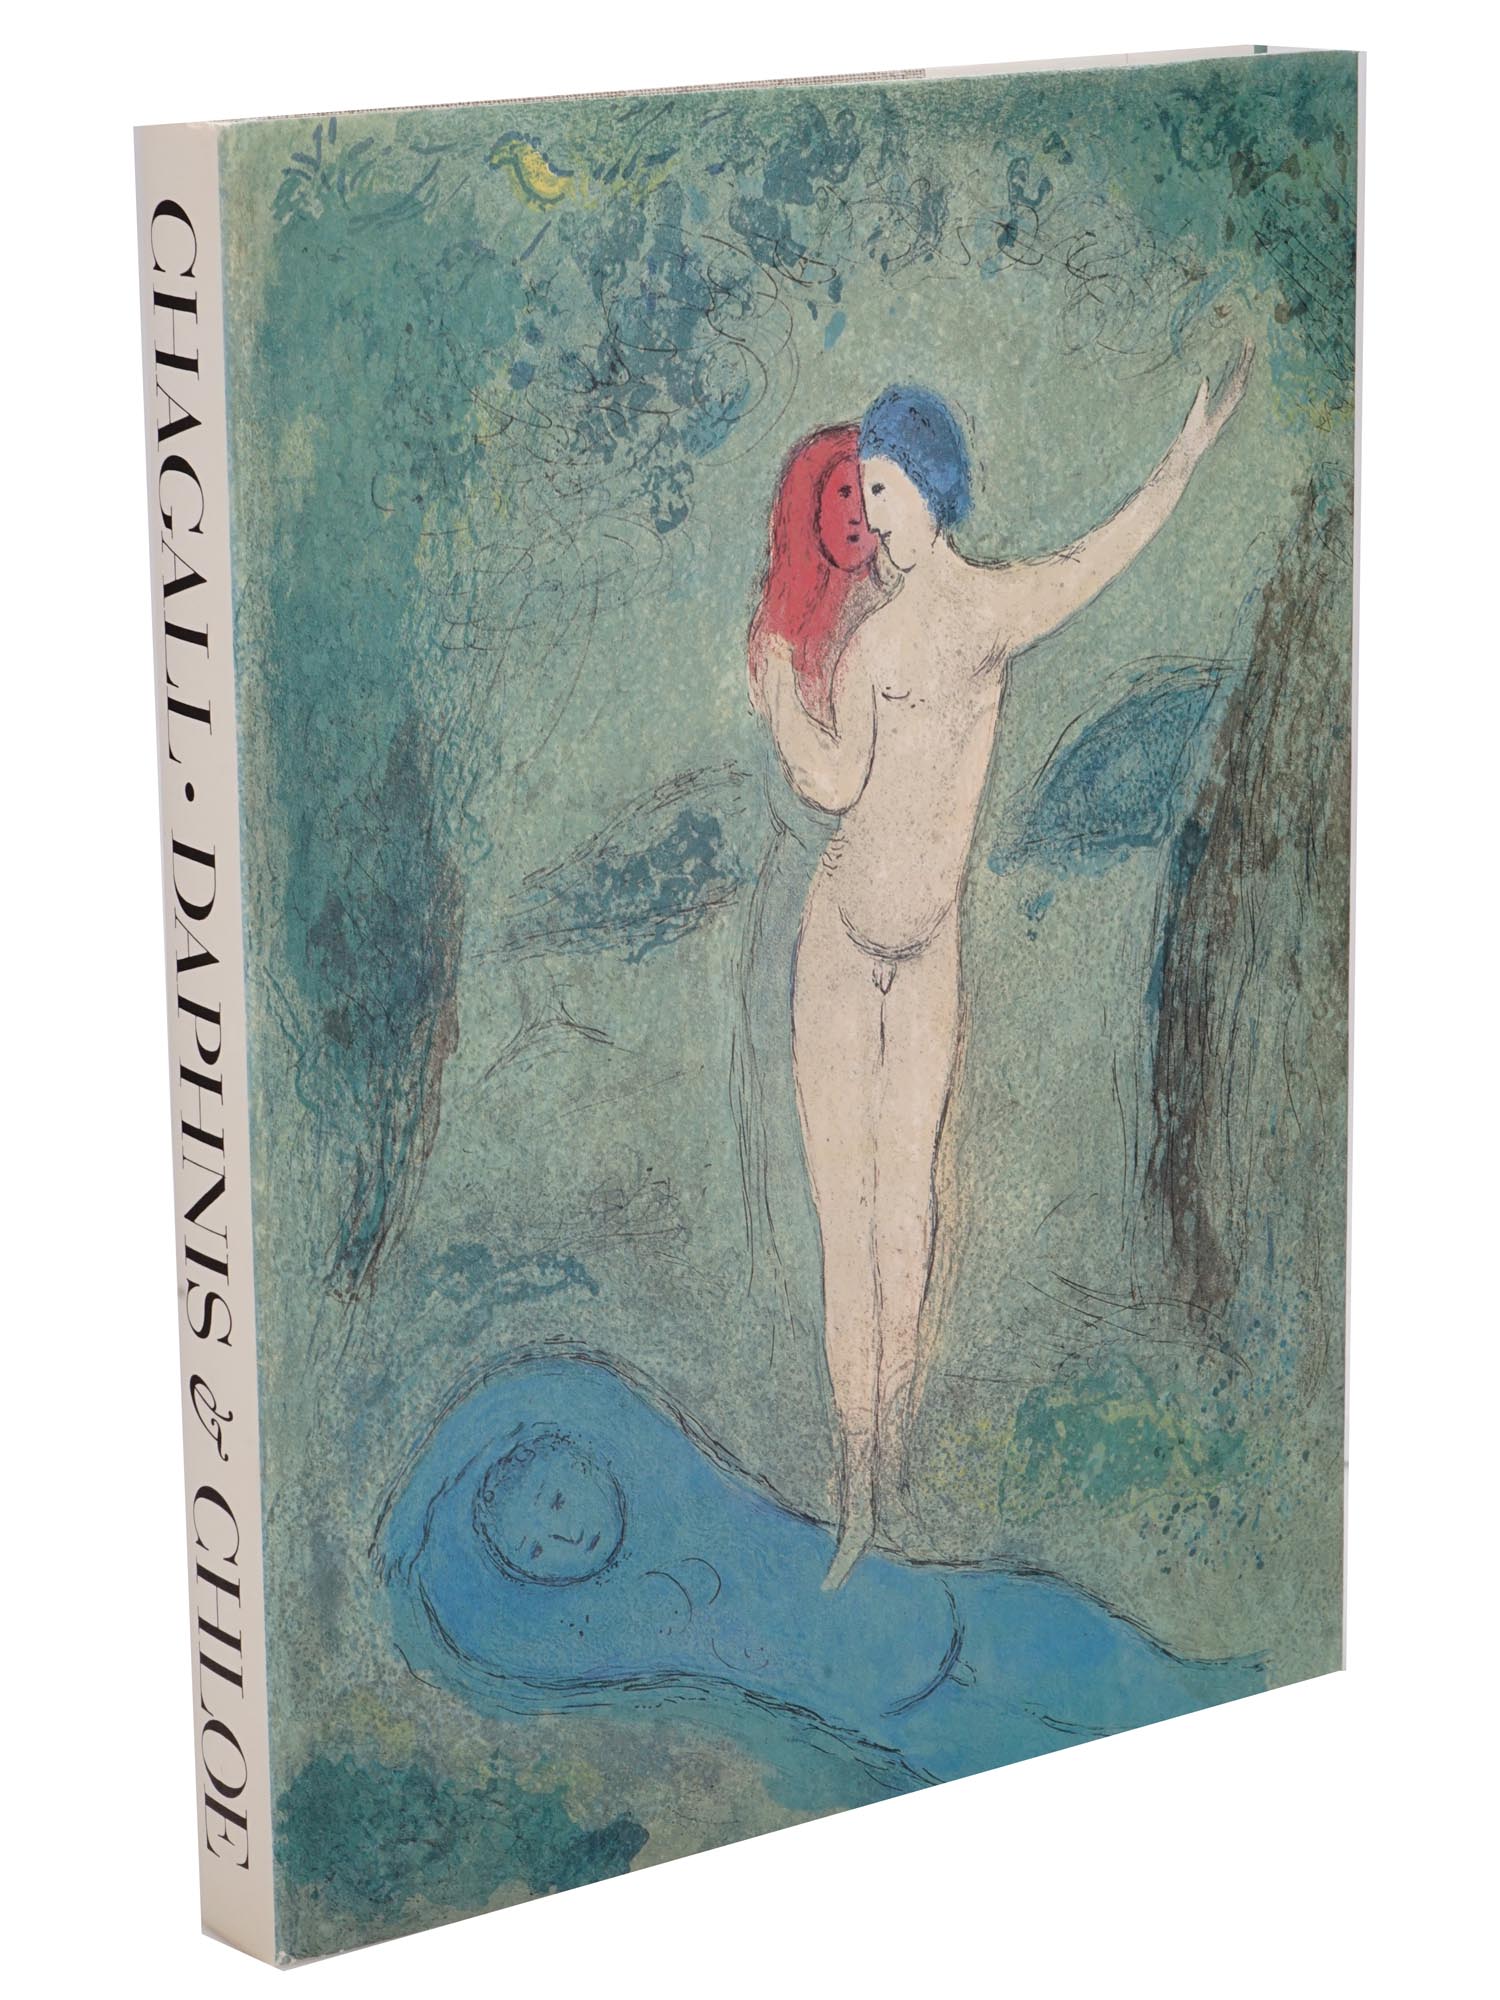 DAPHNIS AND CHLOE BOOK ILLUSTRATED BY MARC CHAGALL PIC-1